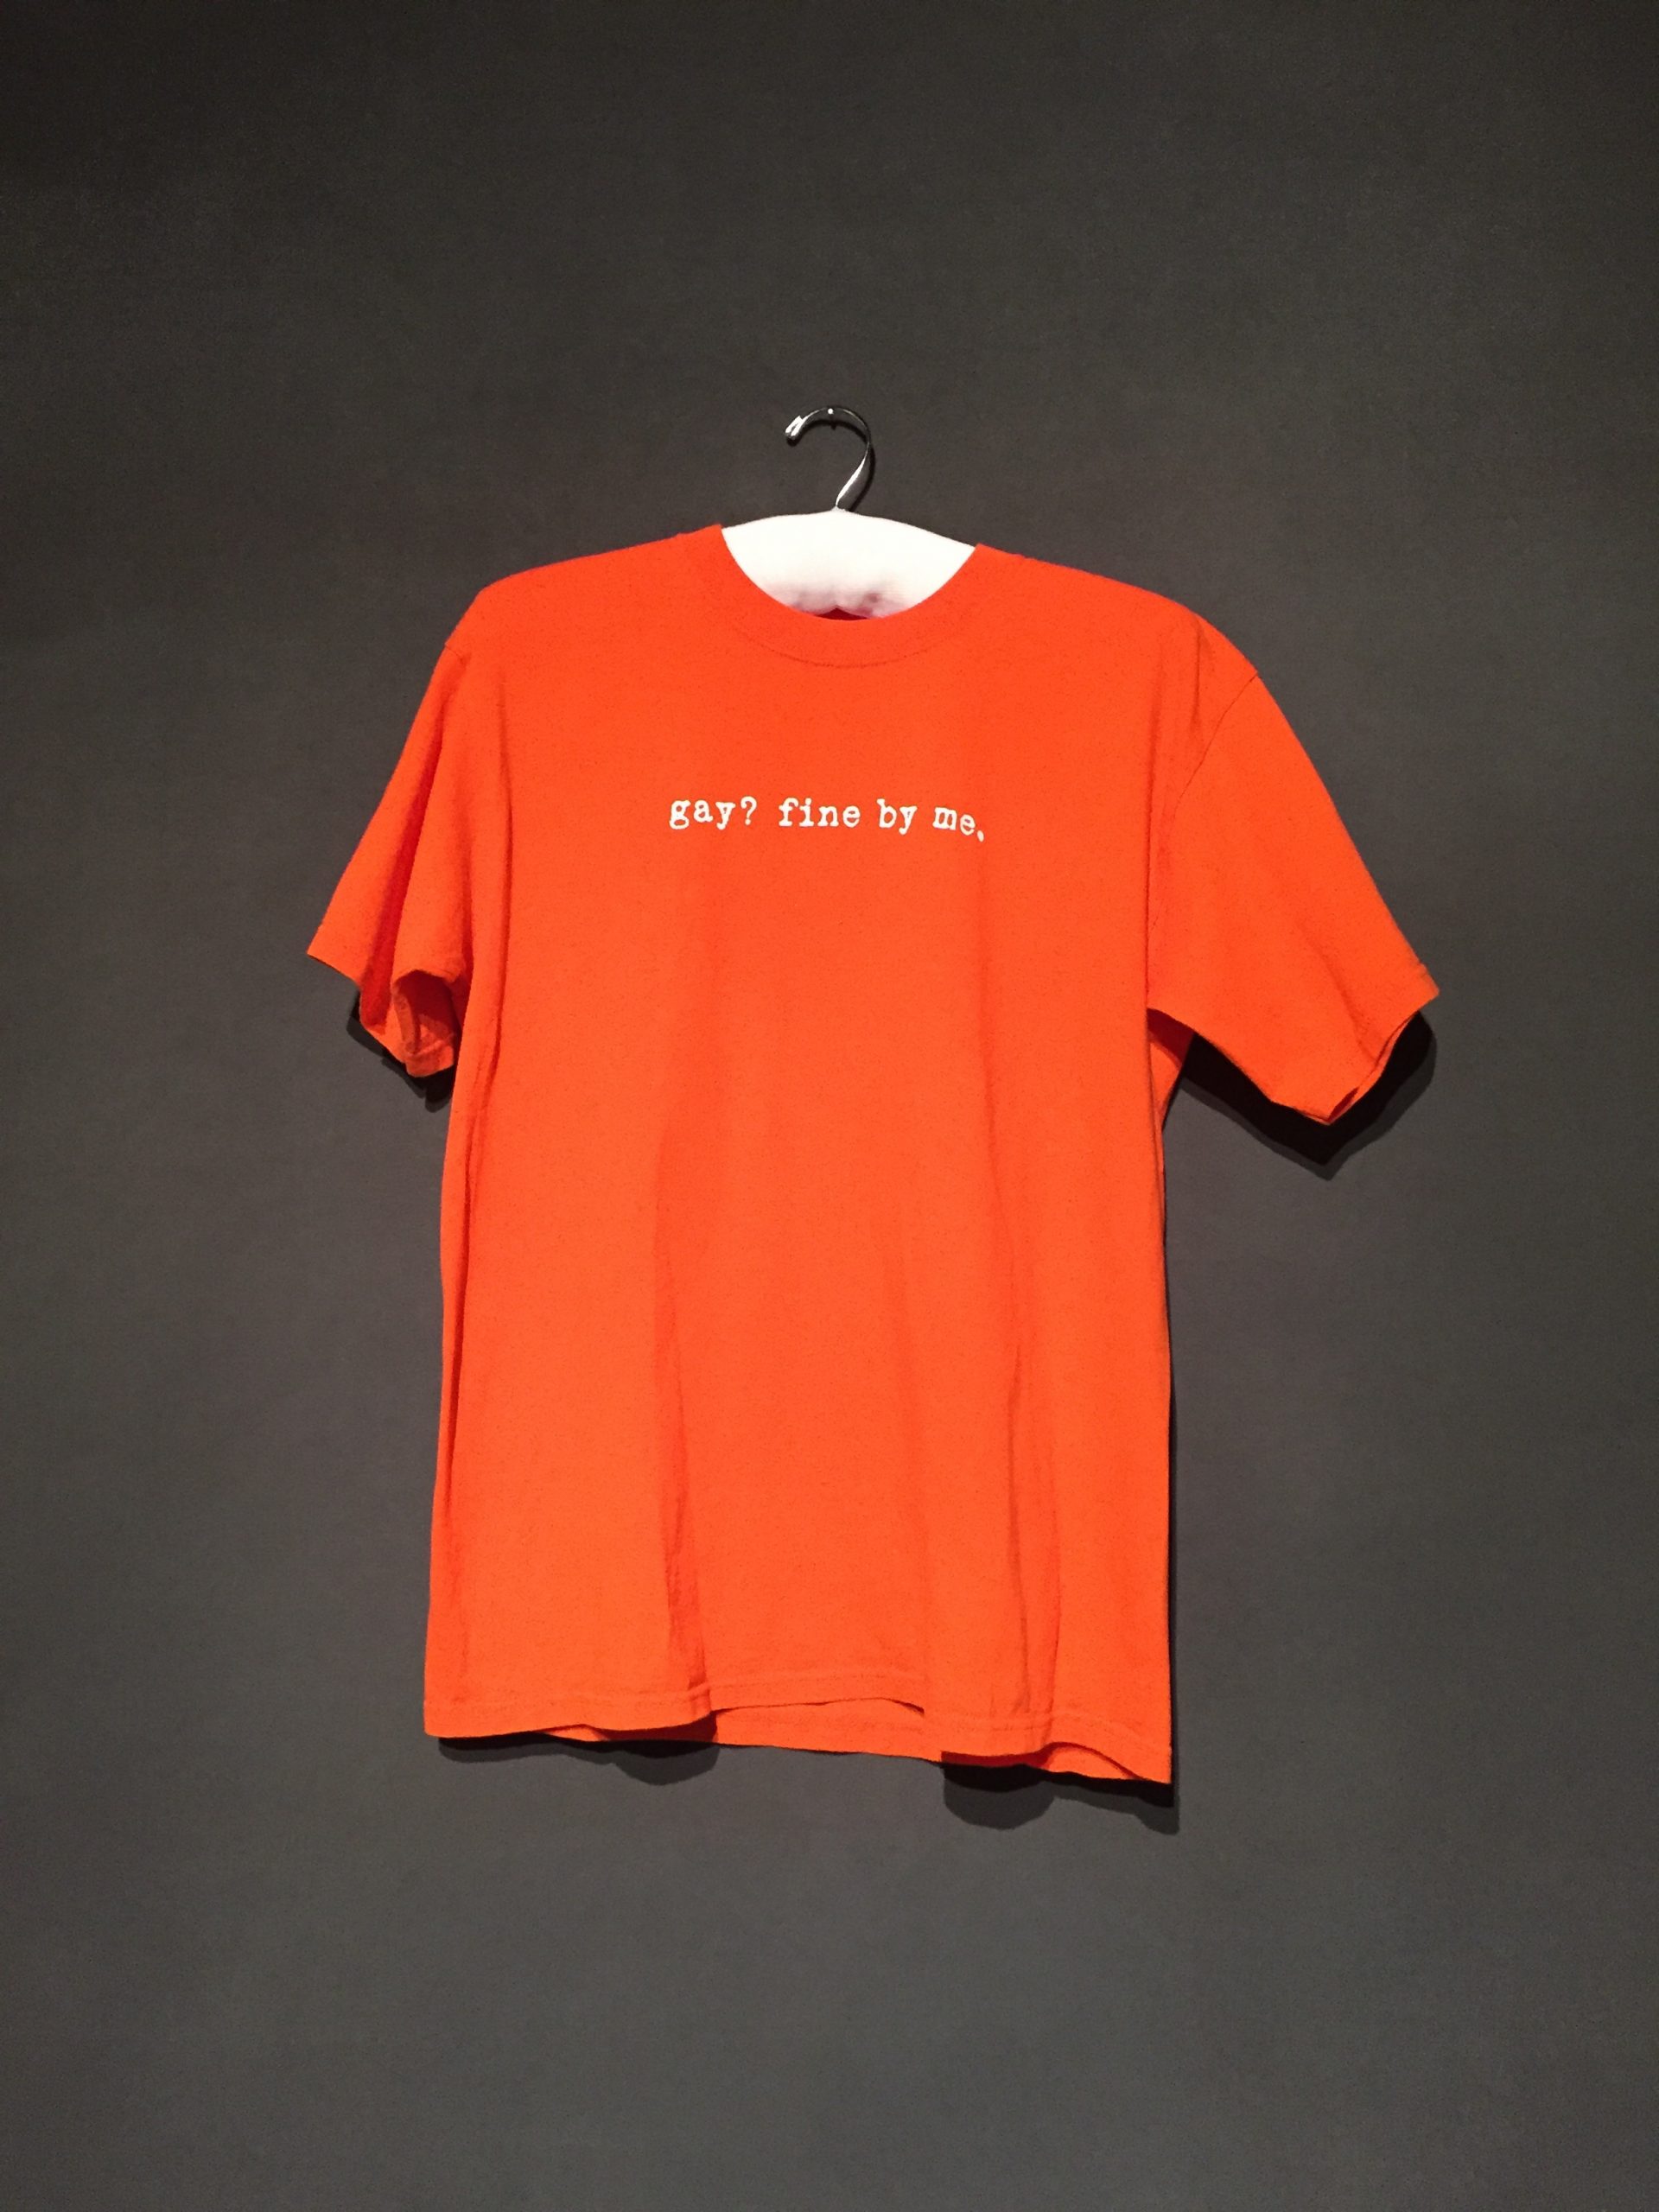 Orange short sleeve t-shirt with white text reading: "gay? fine by me."